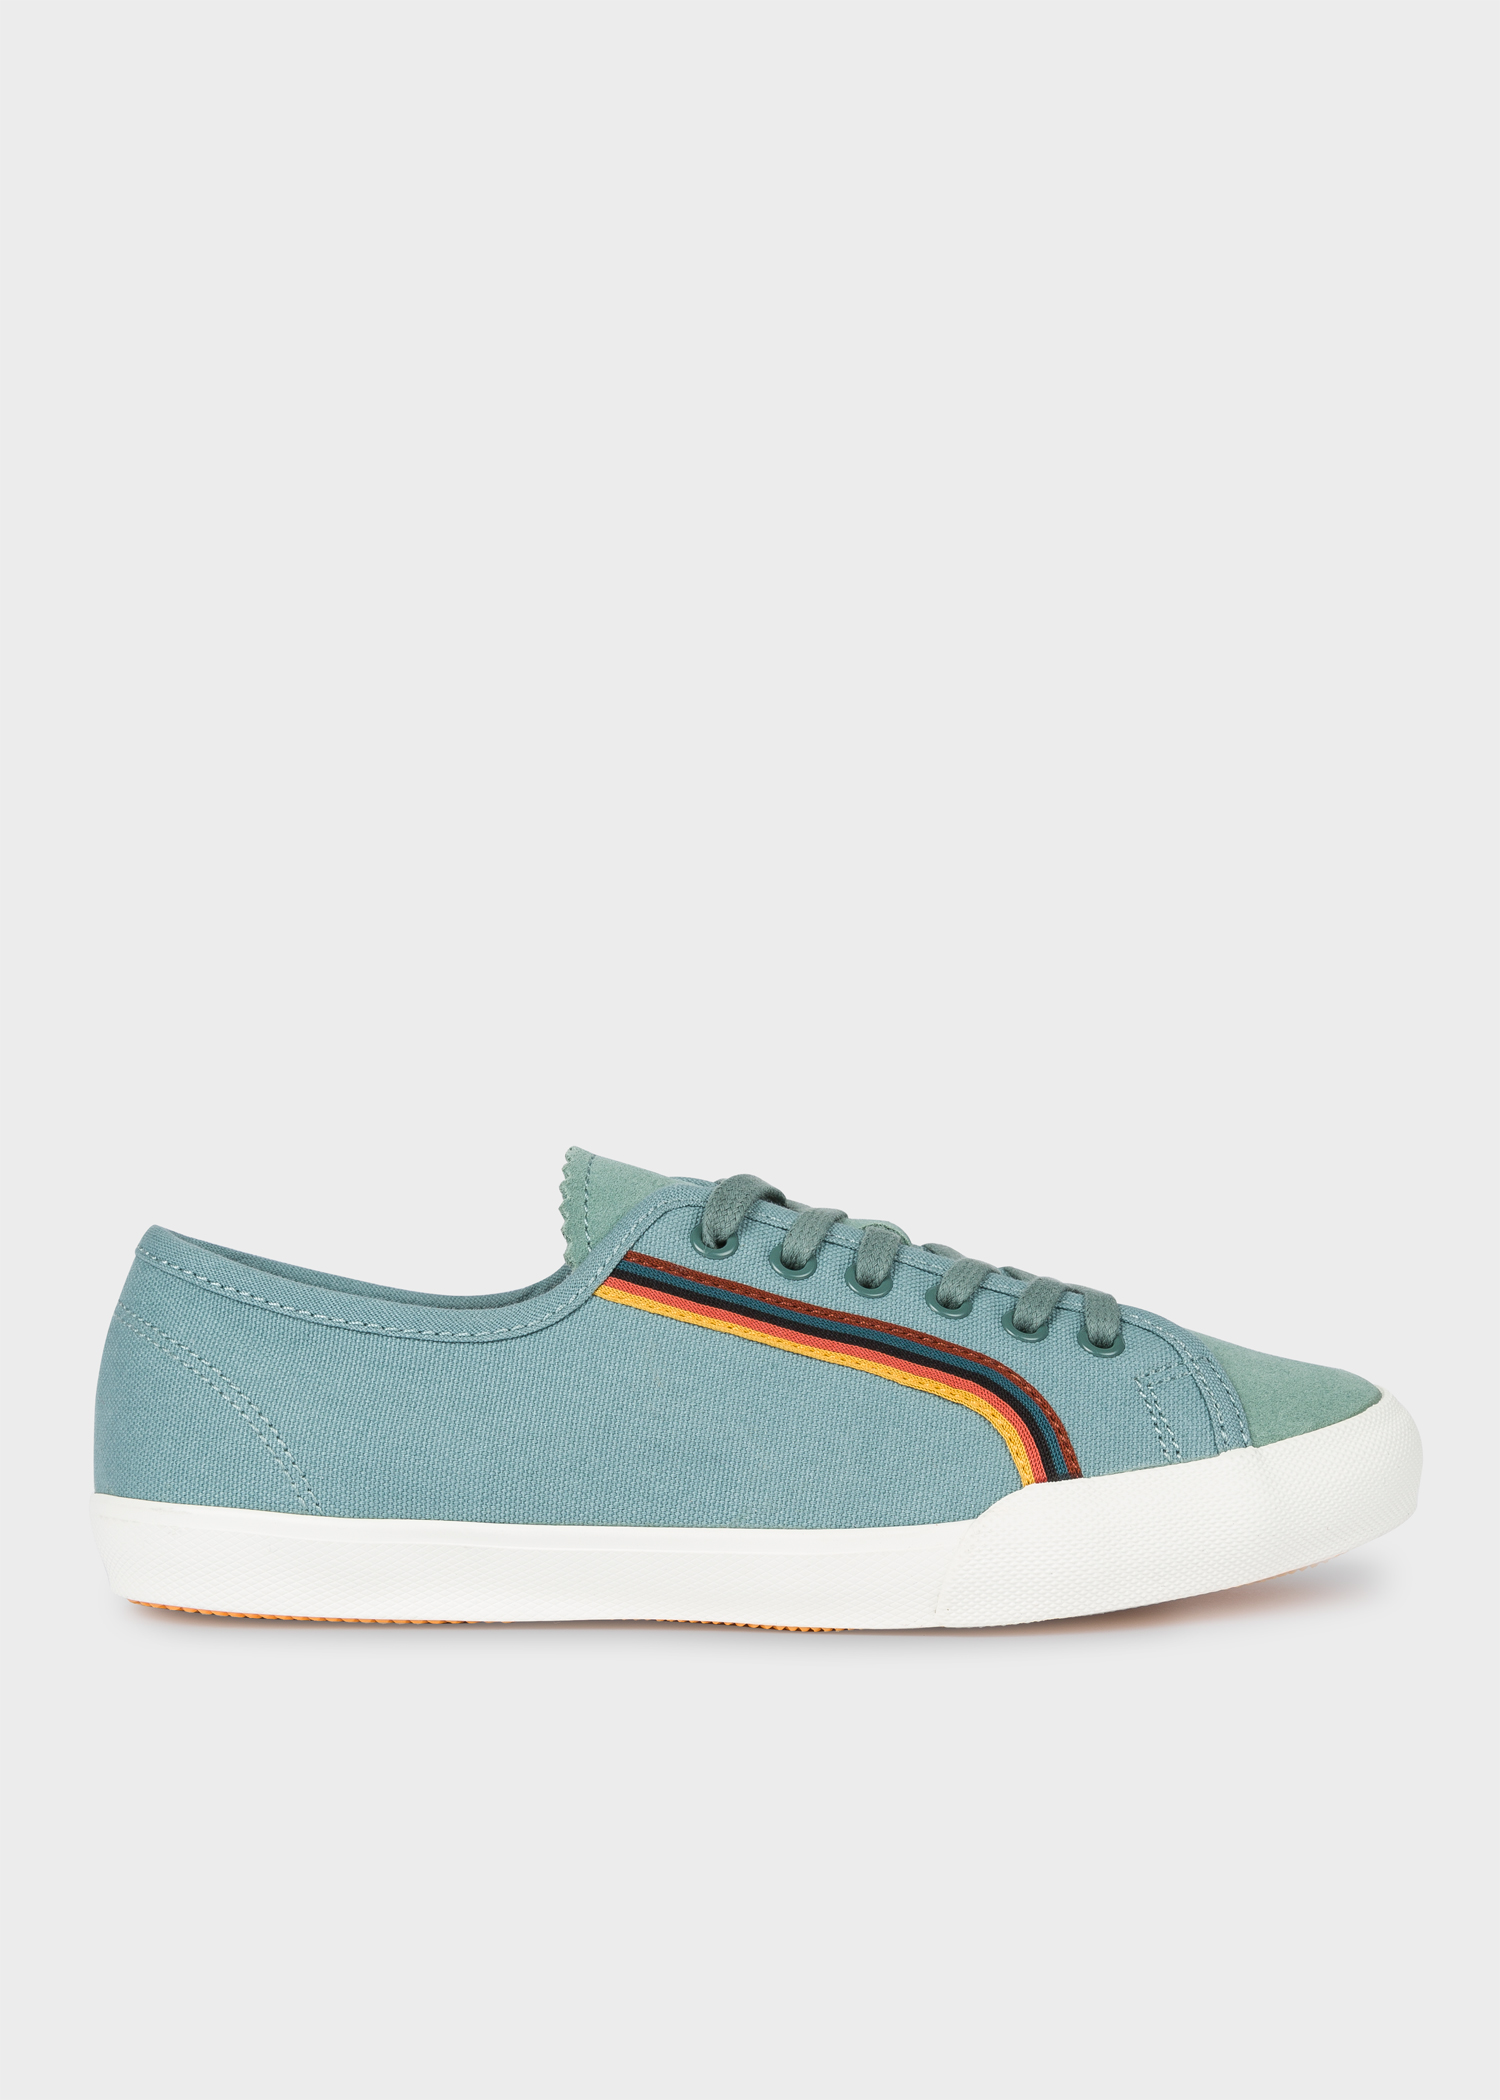 Women's Turquoise Canvas 'Nelson' Sneakers 'Bright Stripe' Trim